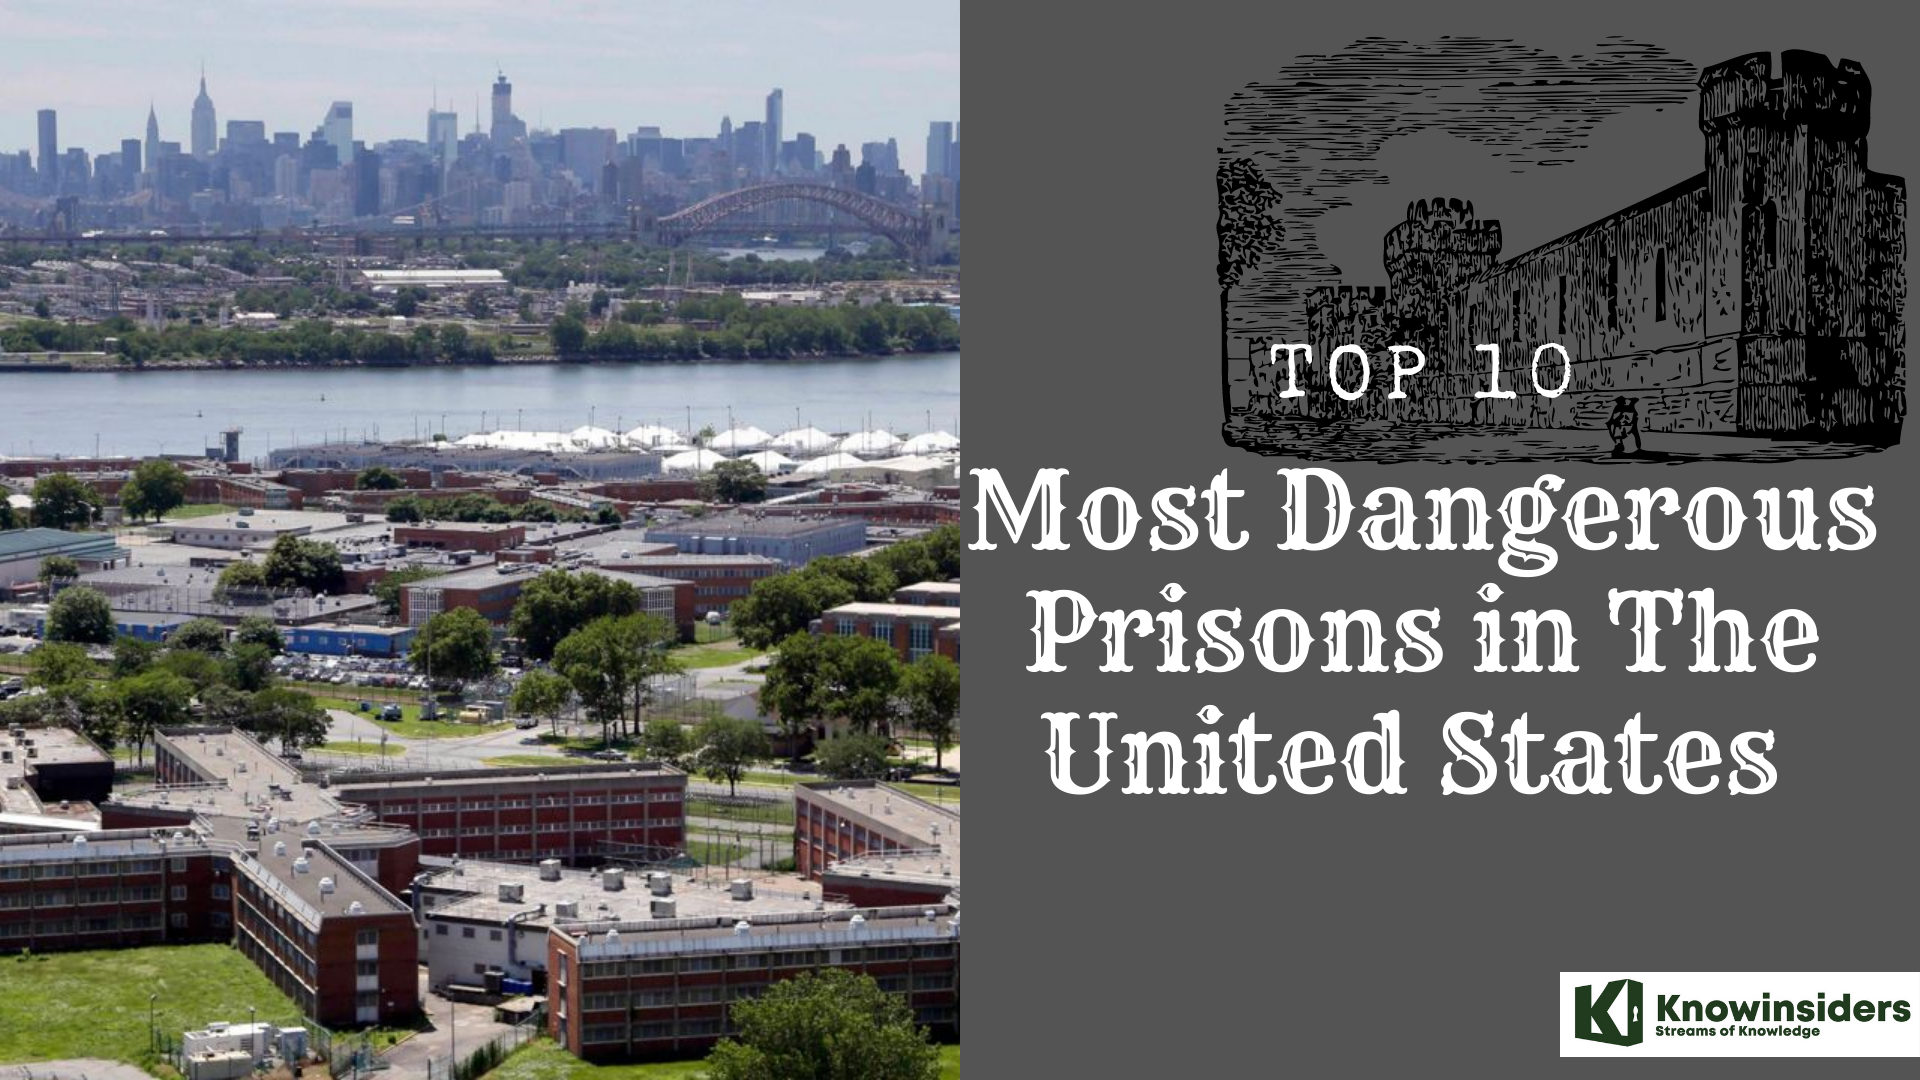 Top 10 Most Dangerous Prisons in the United States